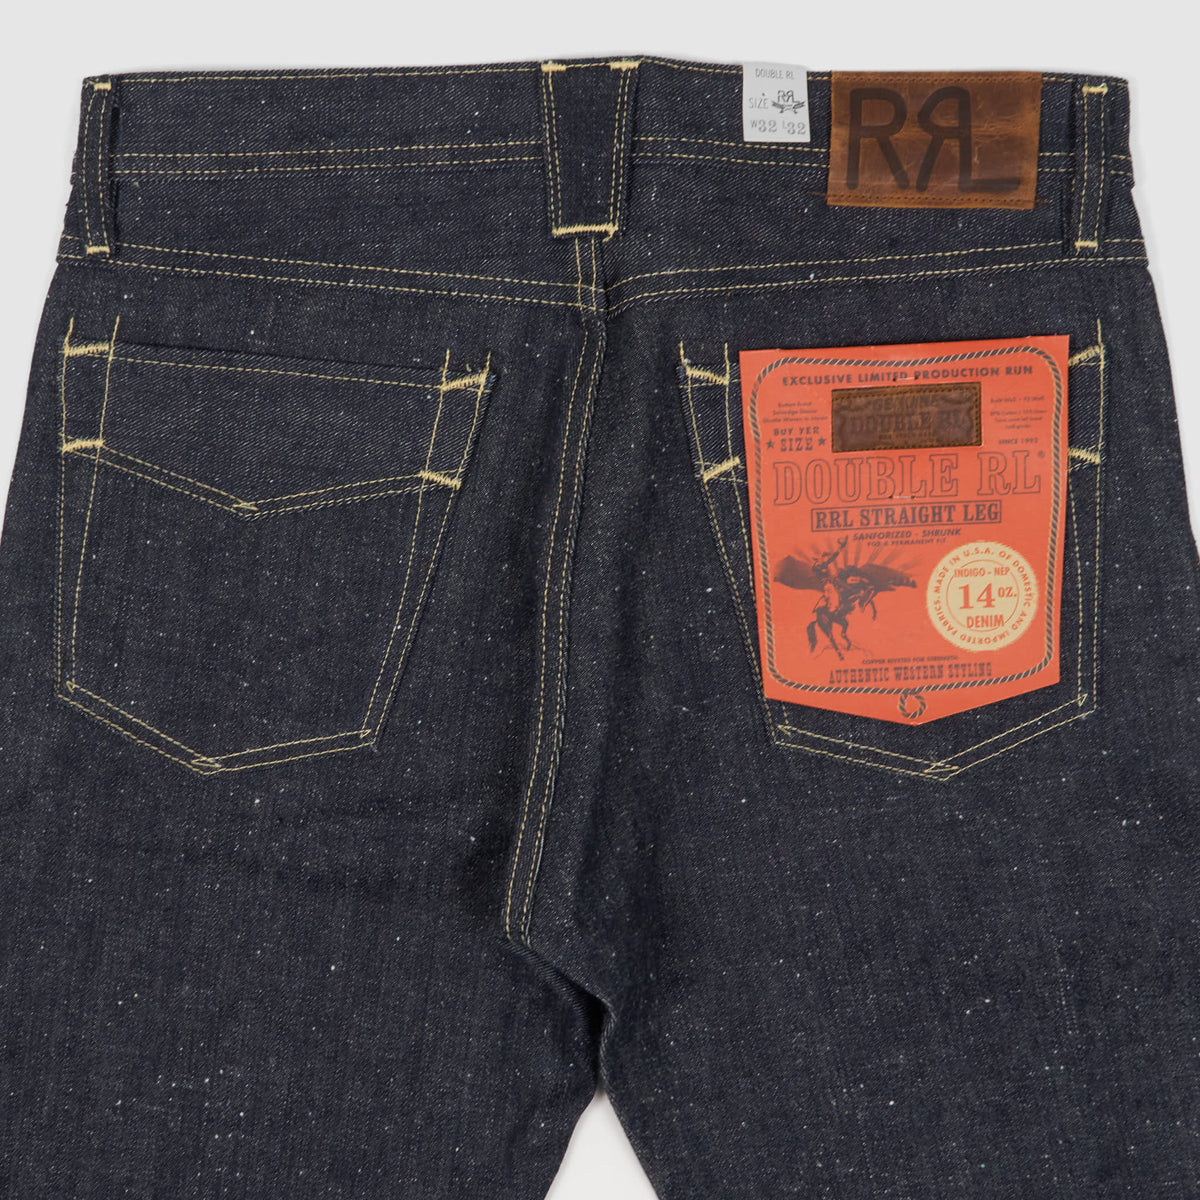 Double RL Limited Edition Straight Indigo Five Pocket Selvage Jeans